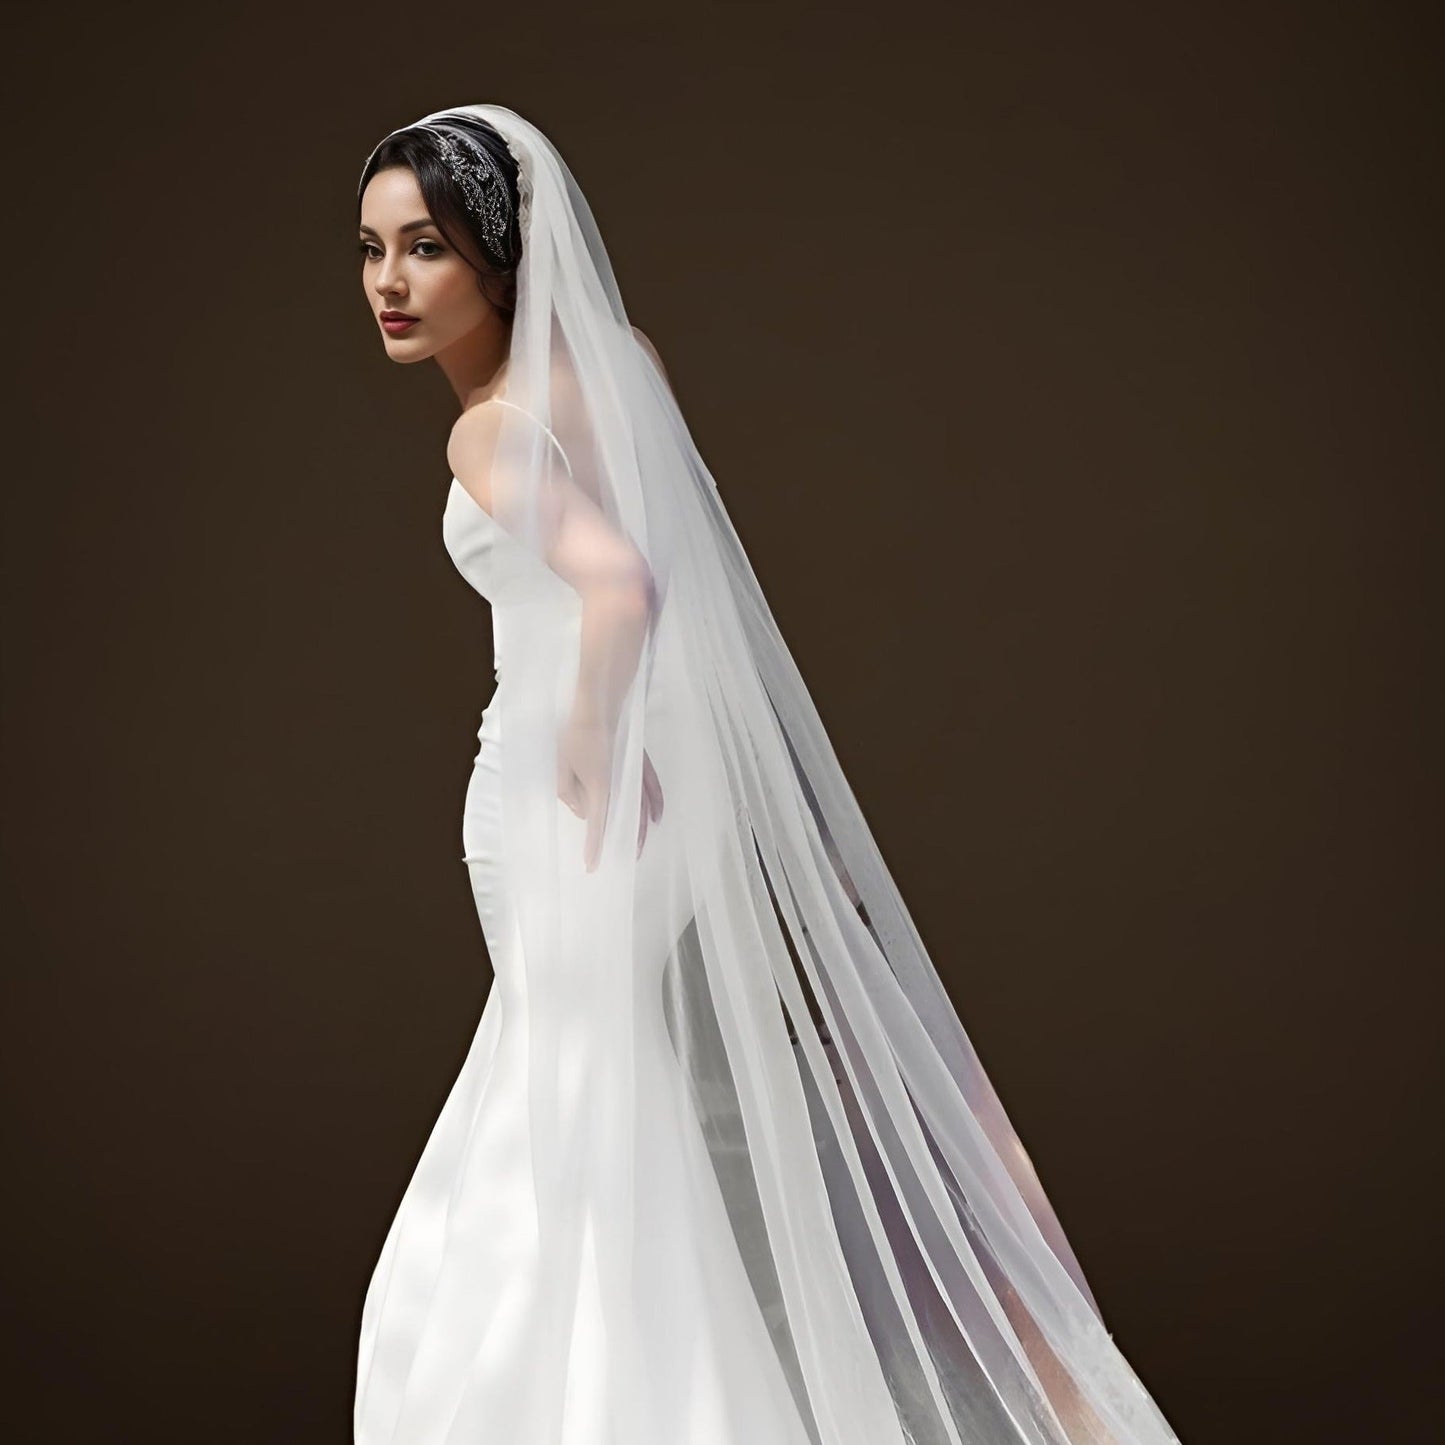 Two Tier Cathedral Wedding Veil (100cm - 500cm)